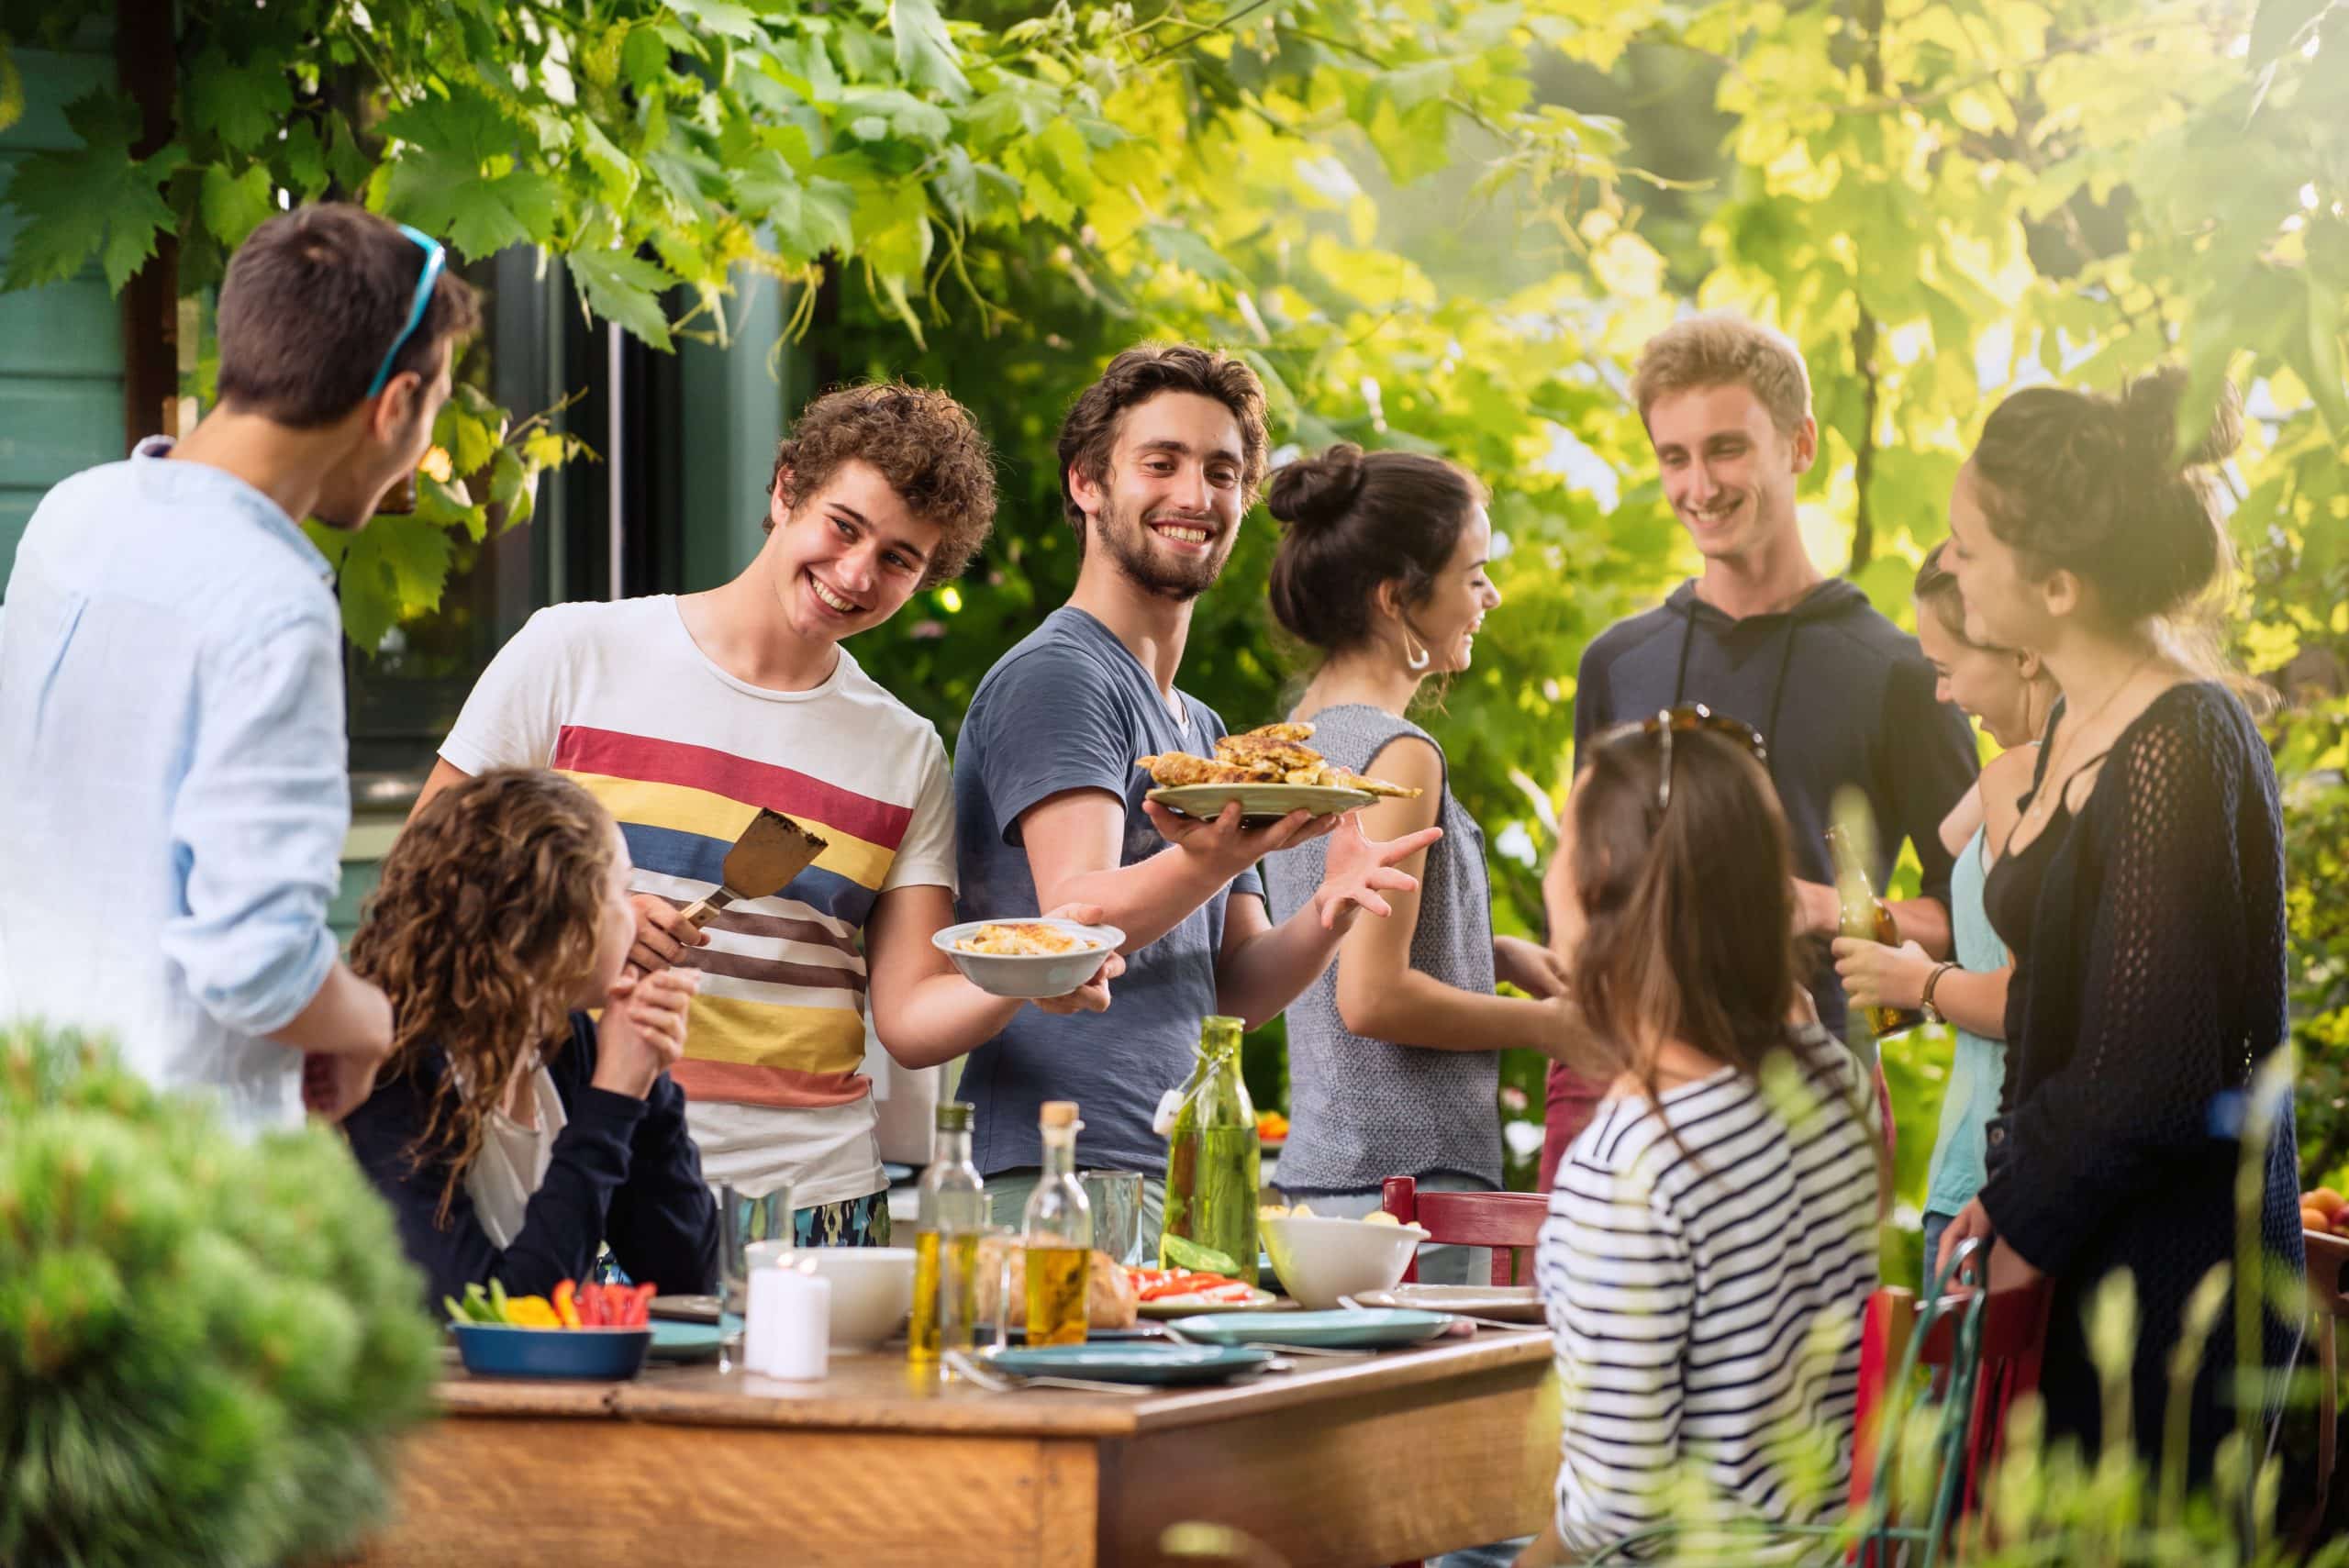 Kids coming home for summer? Our storage unit in Newbury will help. Image shows a group of friends laughing around a table eating food in a garden.